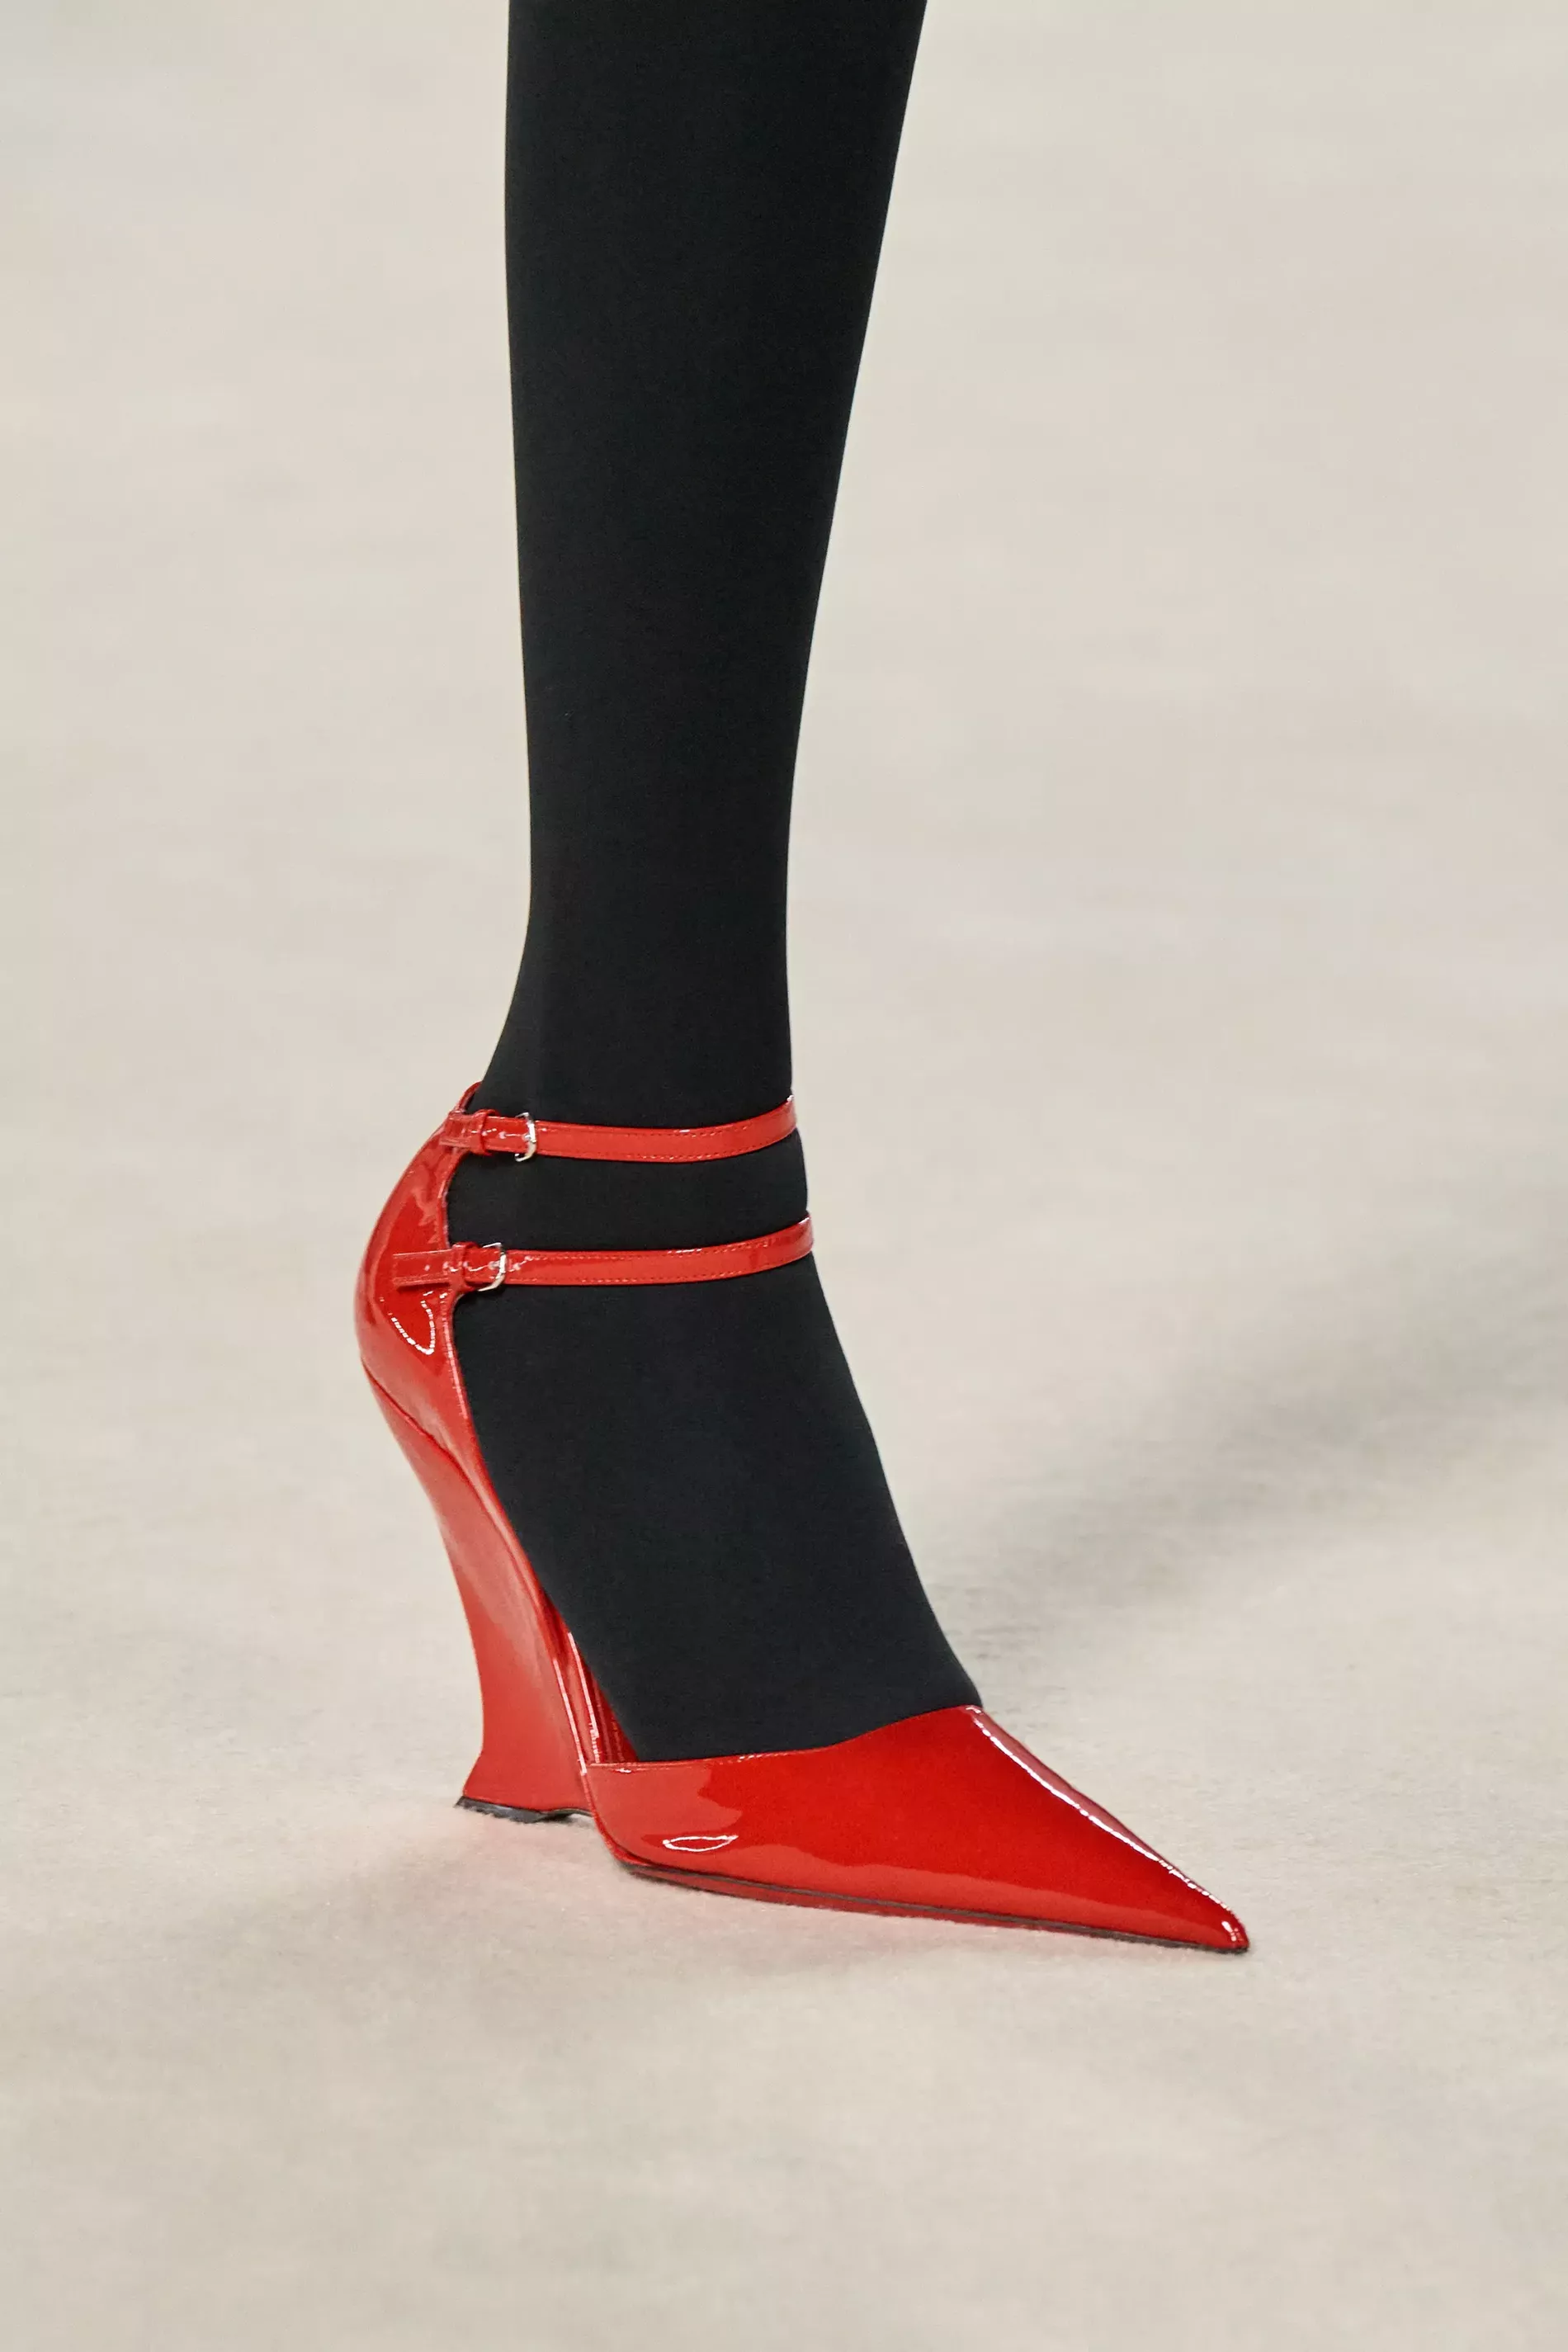 Red shoes are the trendiest party choice this season - Vogue Scandinavia